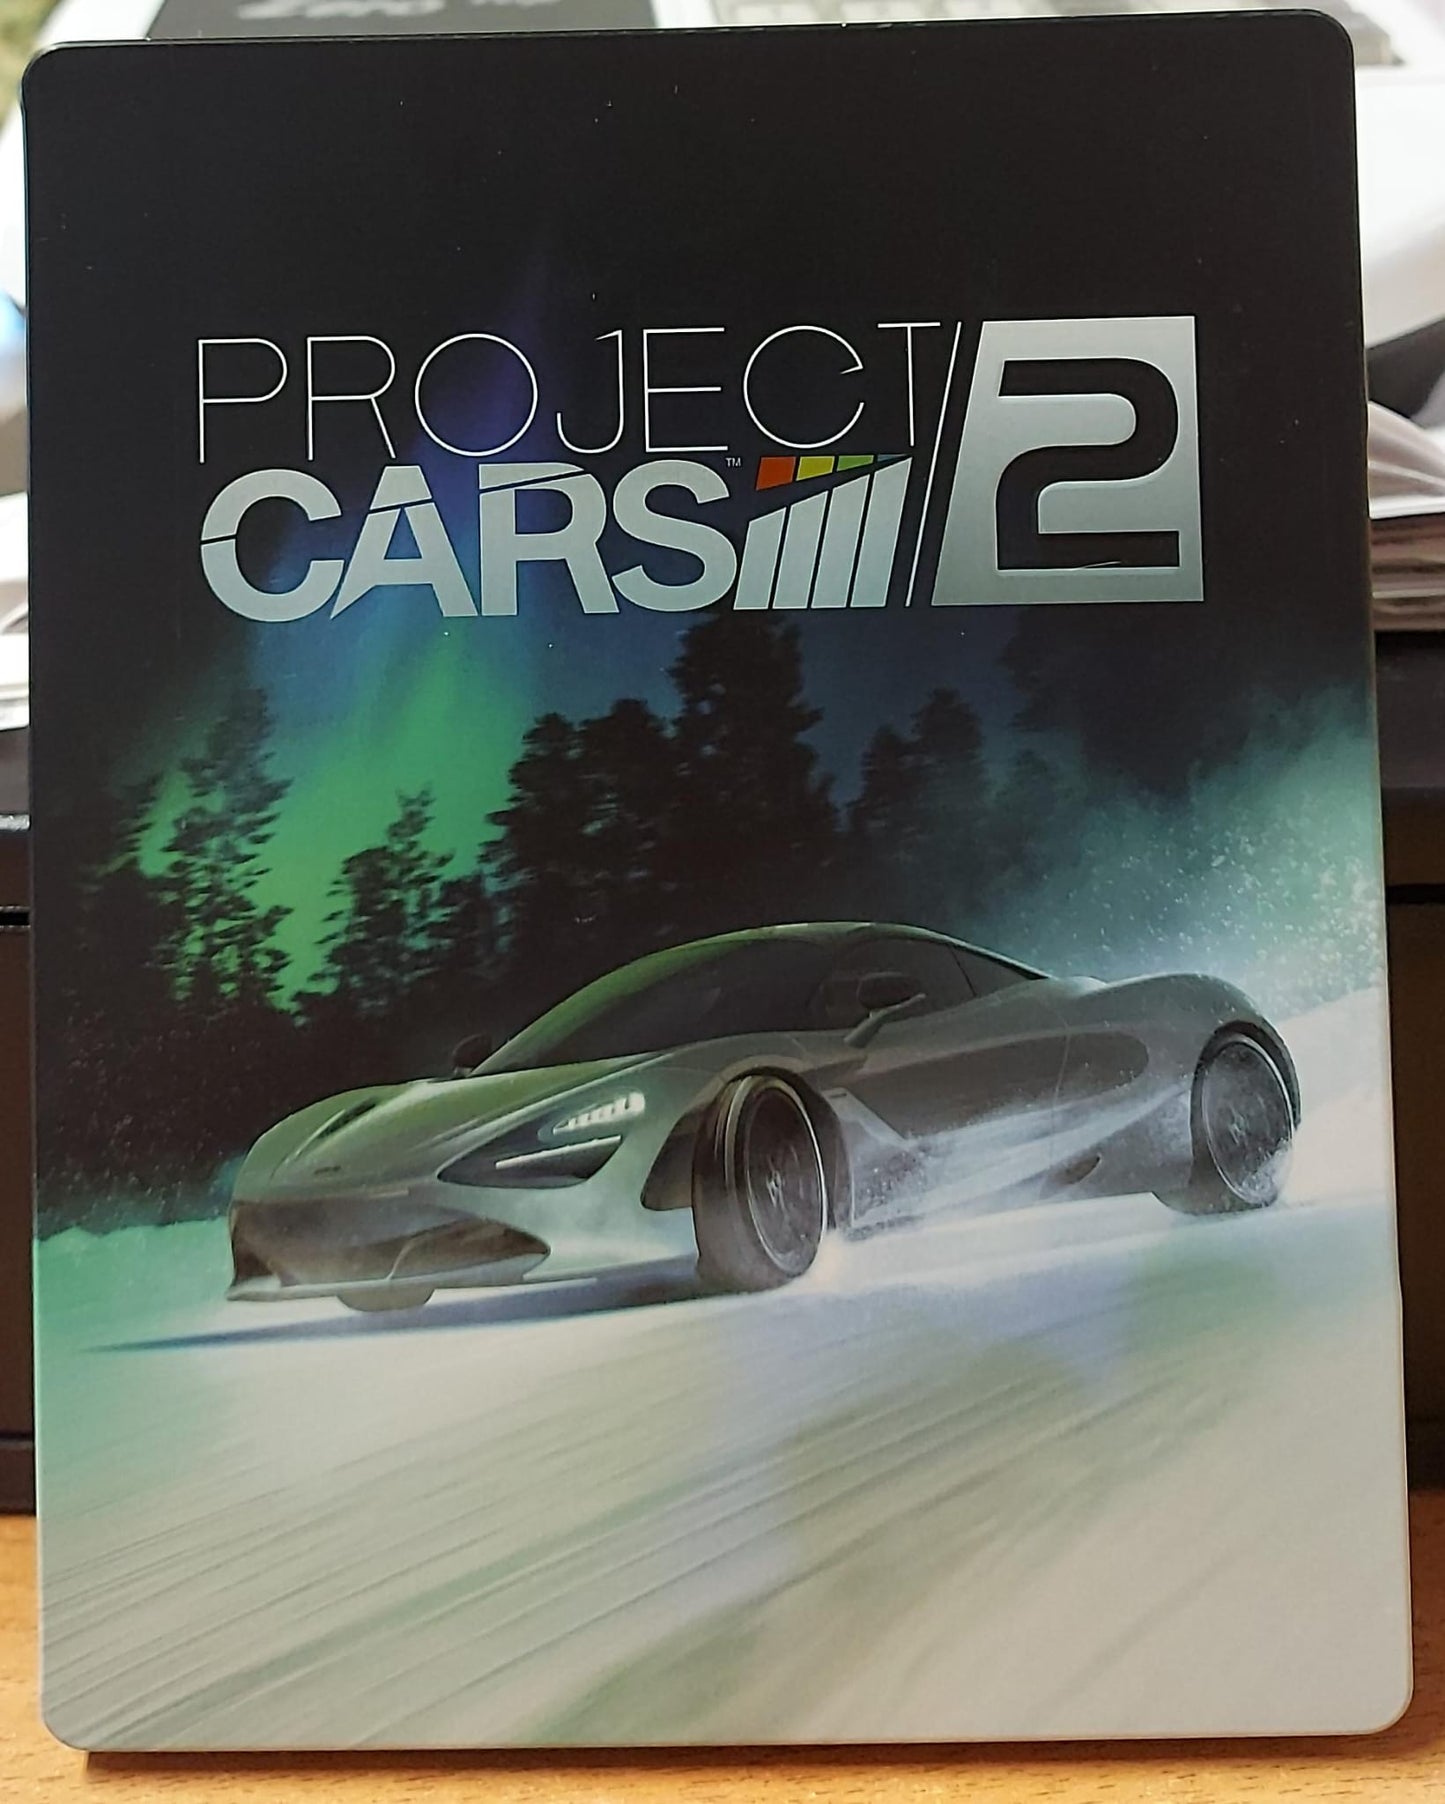 PROJECT CARS 2 LIMITED EDITION CON STEELBOOK